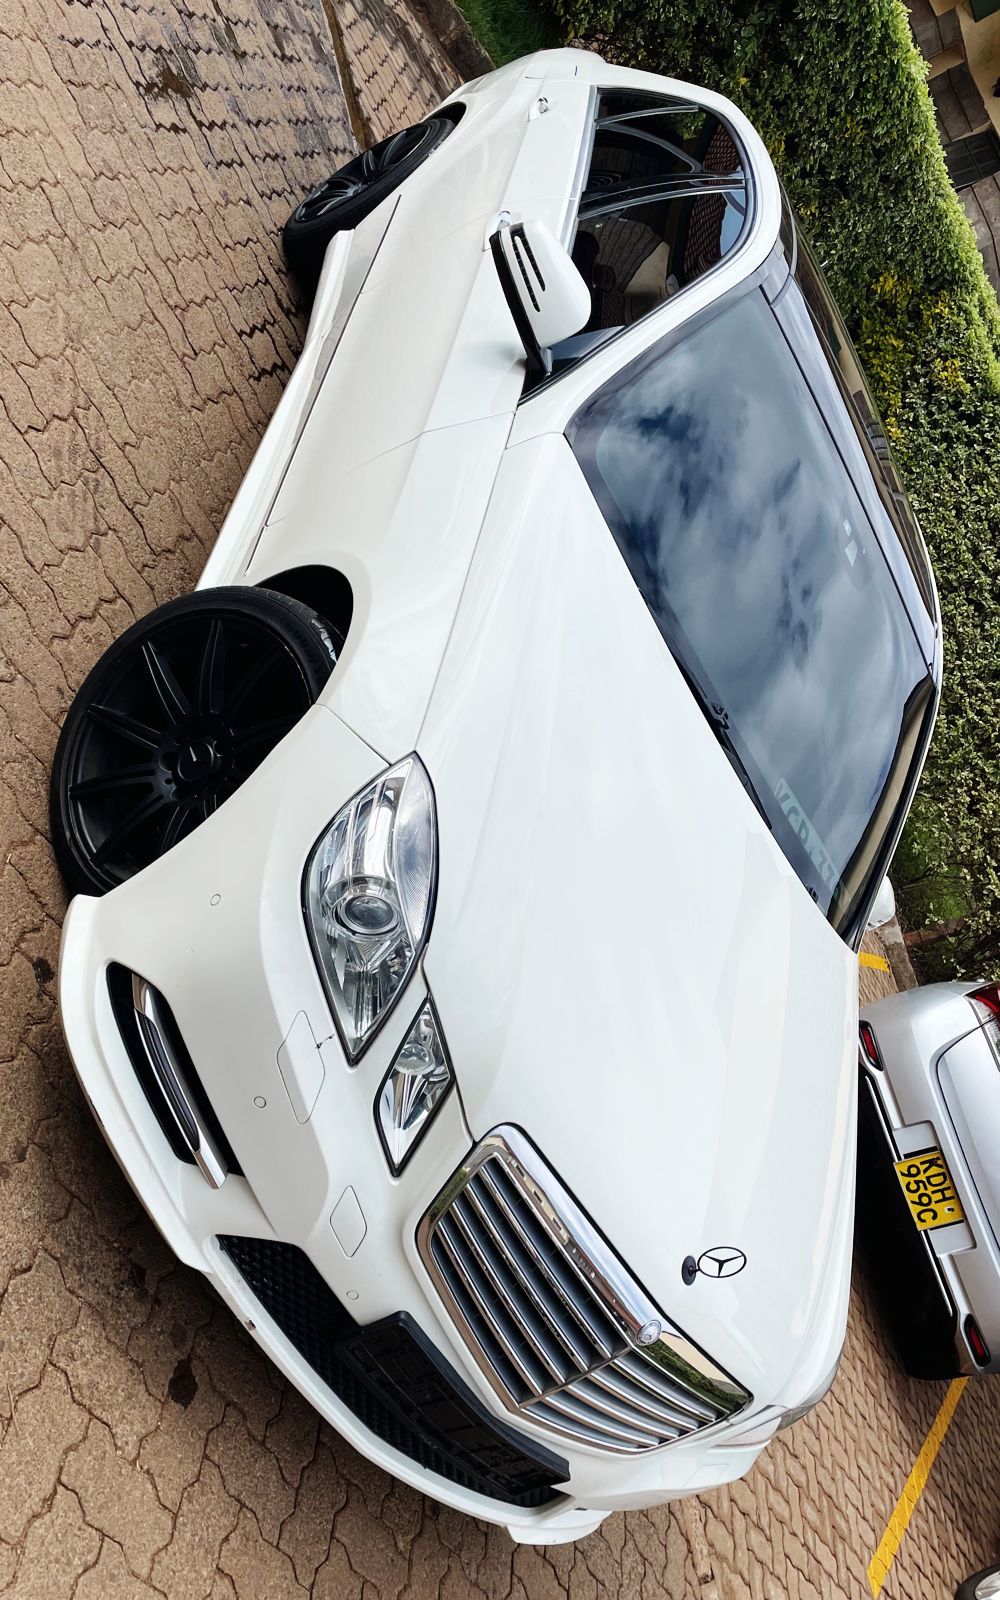 Mercedes Benz E250 SUNROOF Cheapest You Pay 30% DEPOSIT Trade in OK